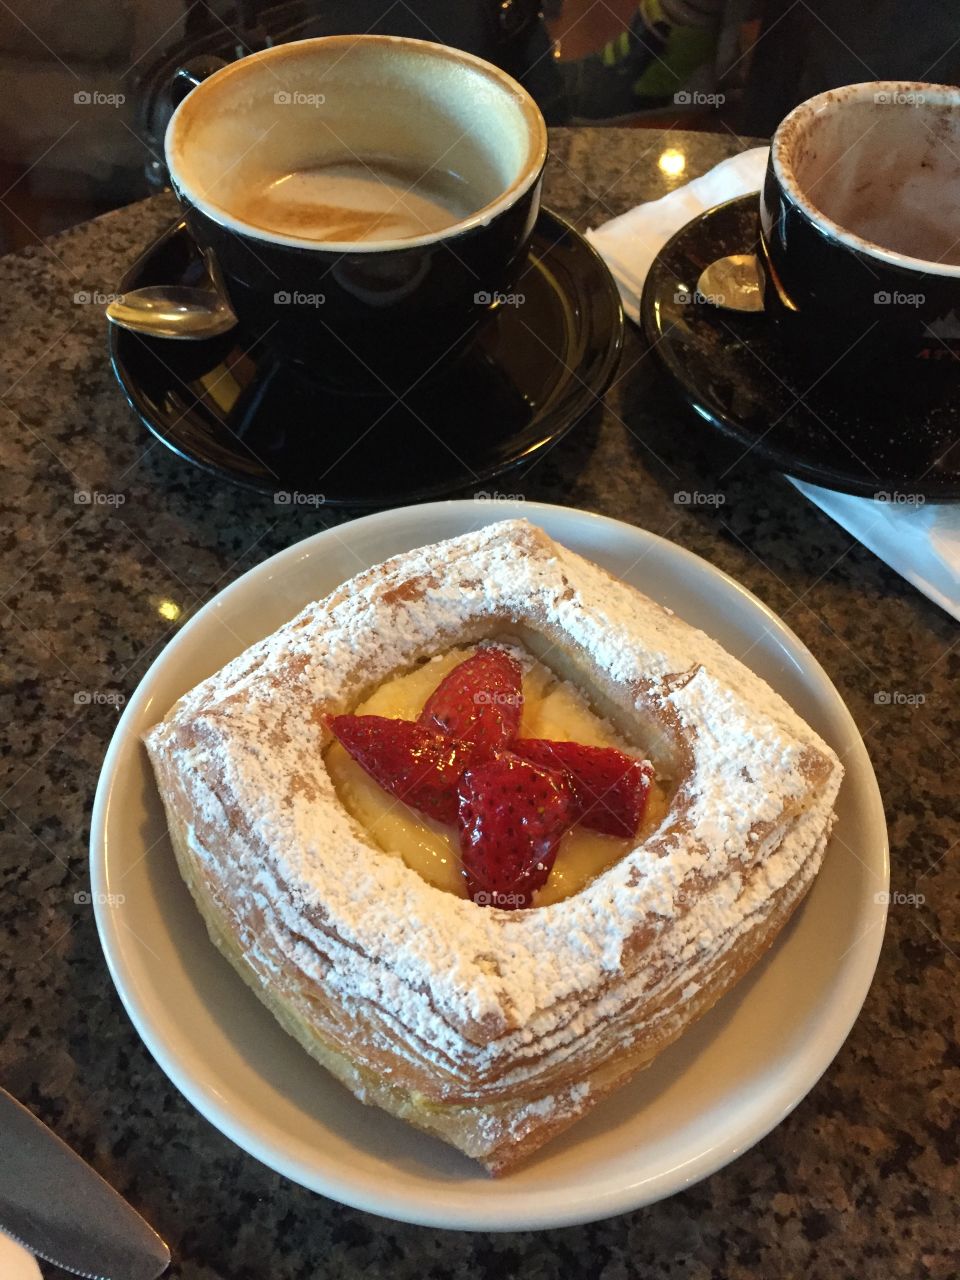 The French bakery, strawberry danish, yummy pastry, and coffee